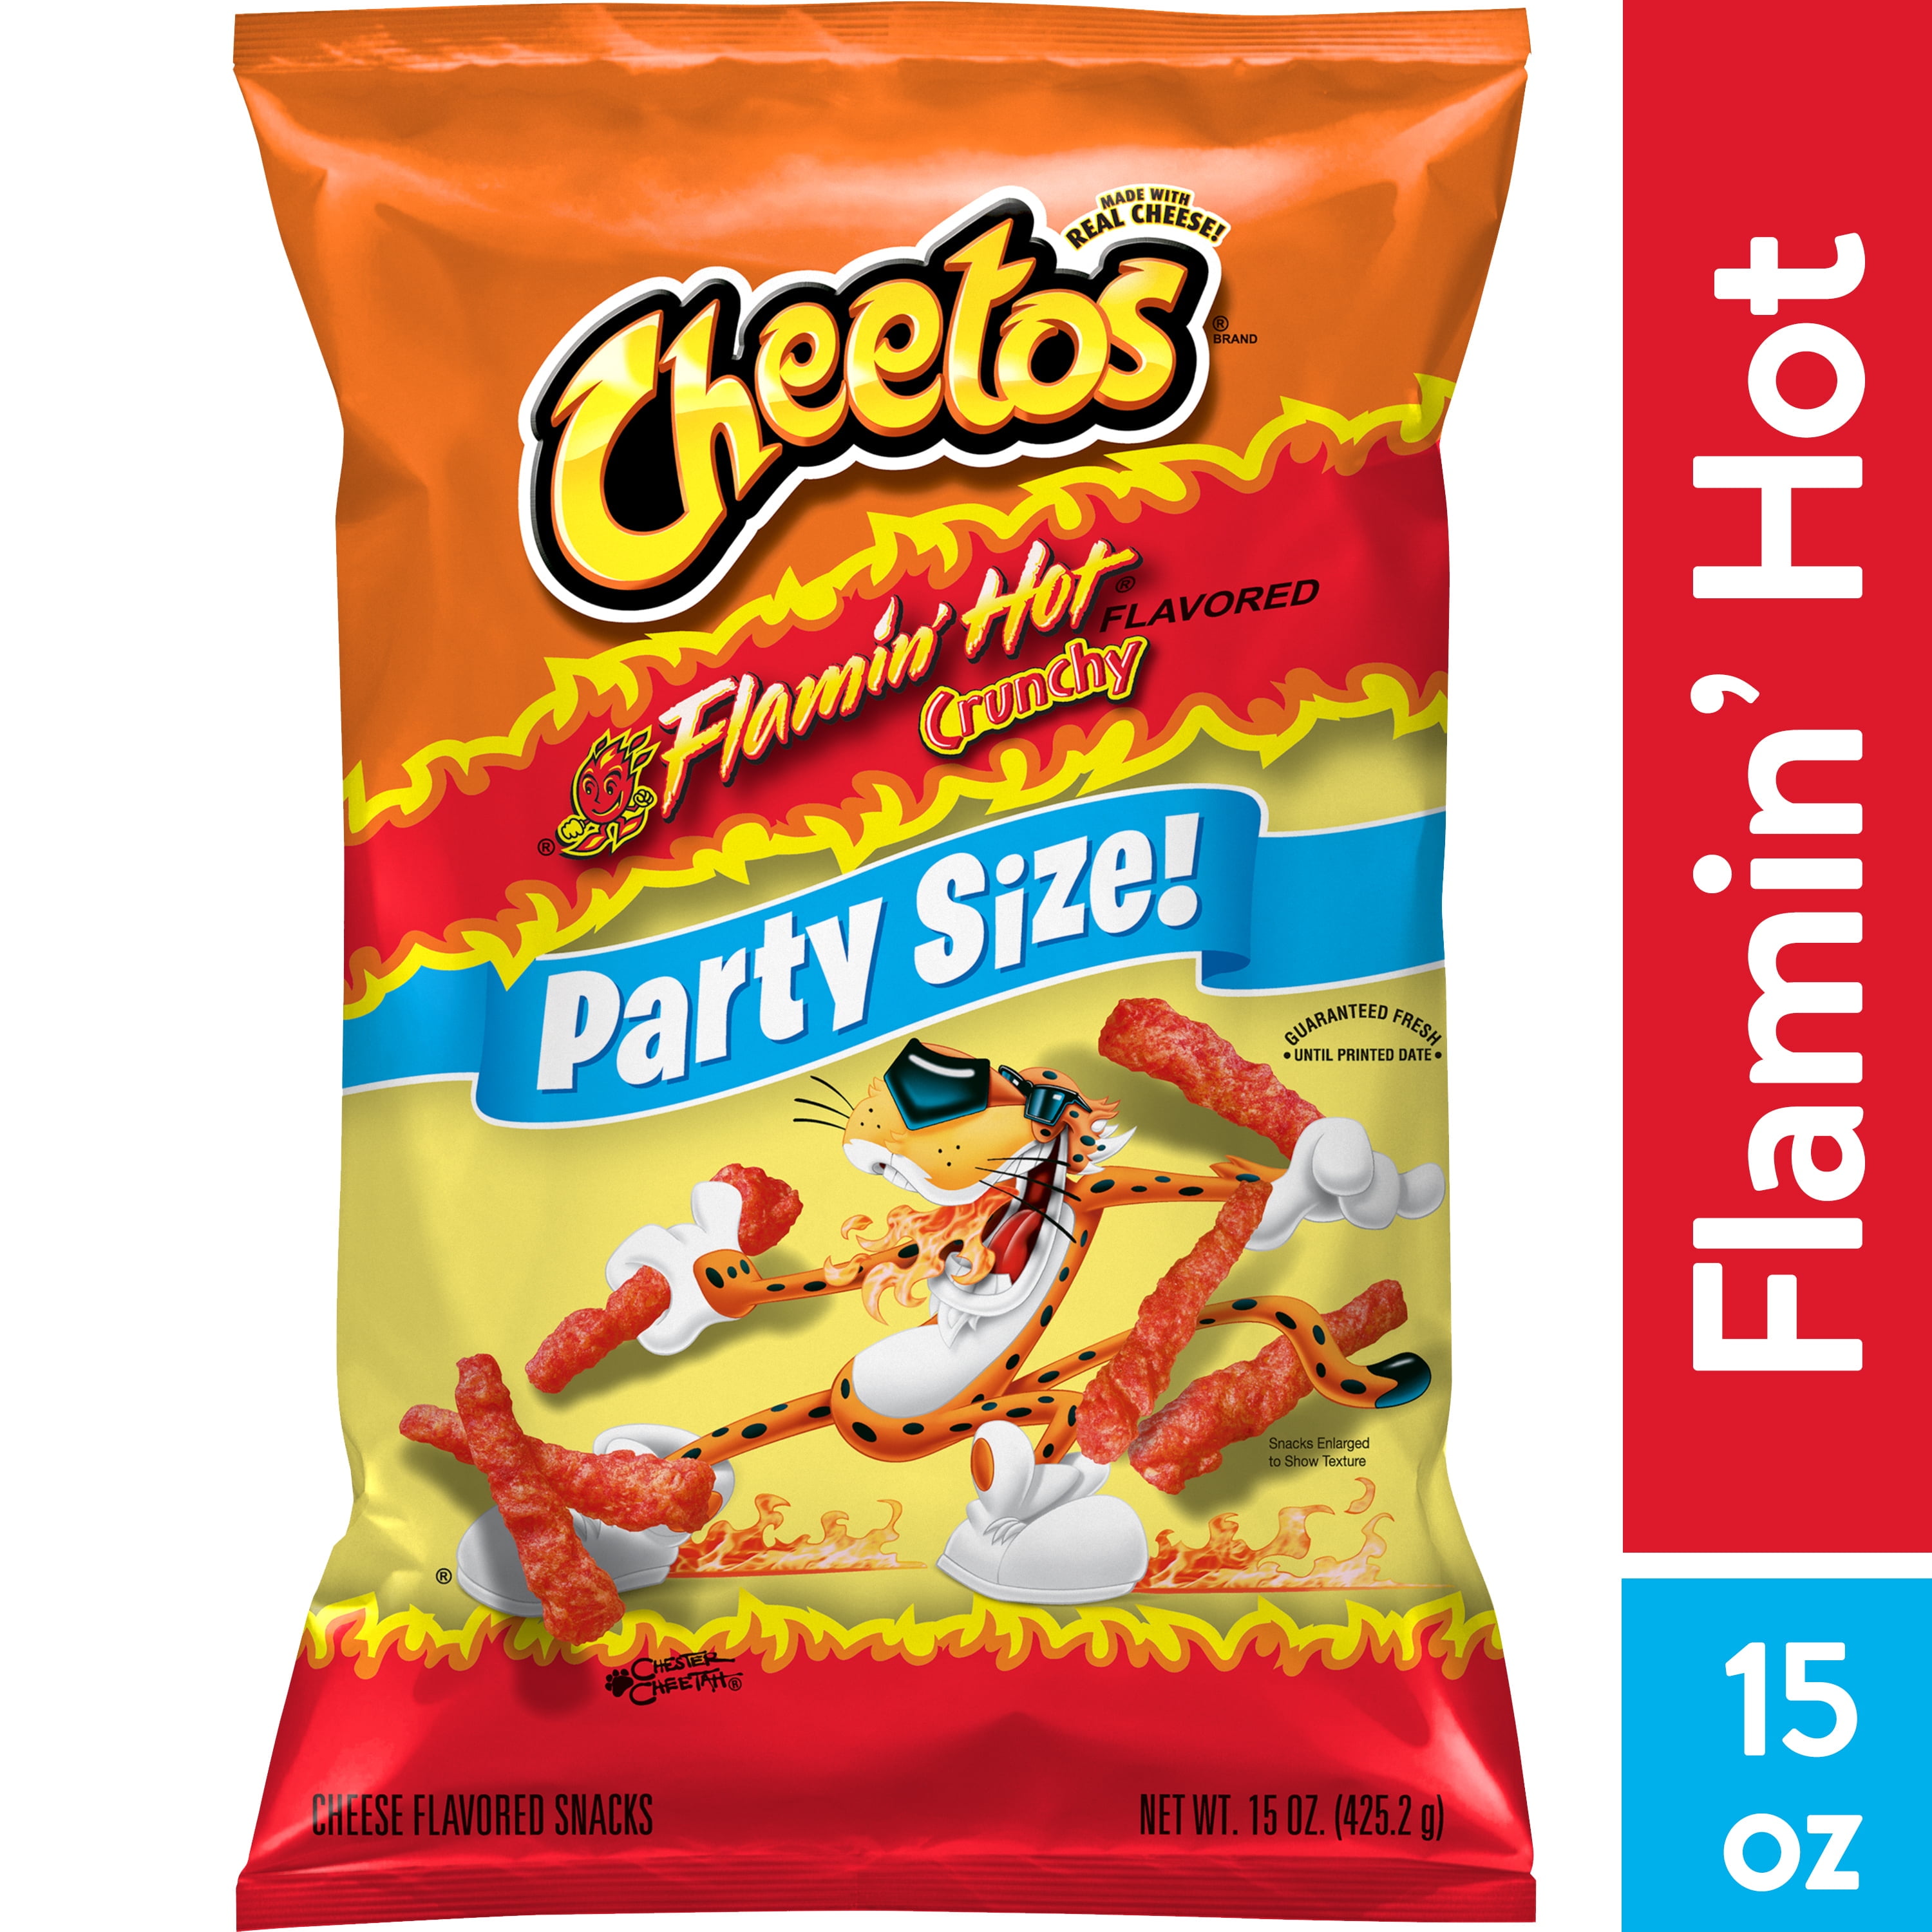 Cheetos Crunchy Flamin' Hot Cheese Flavored Snack Chips, Party Size, 15 oz Bag